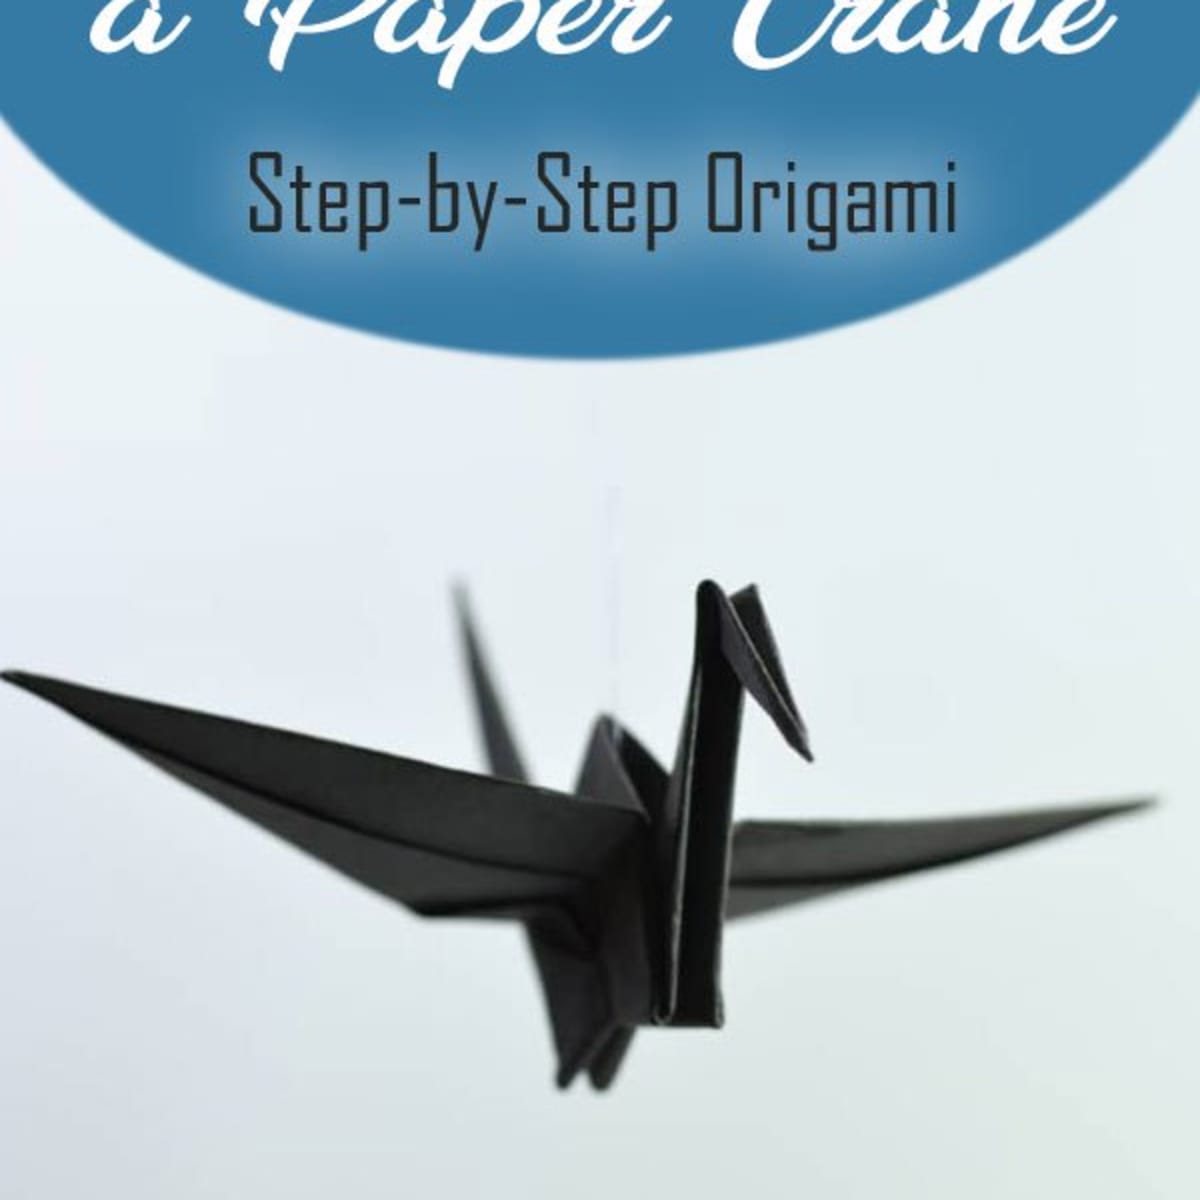 Paper Strip Folding: How to Make Origami Lucky Stars - FeltMagnet